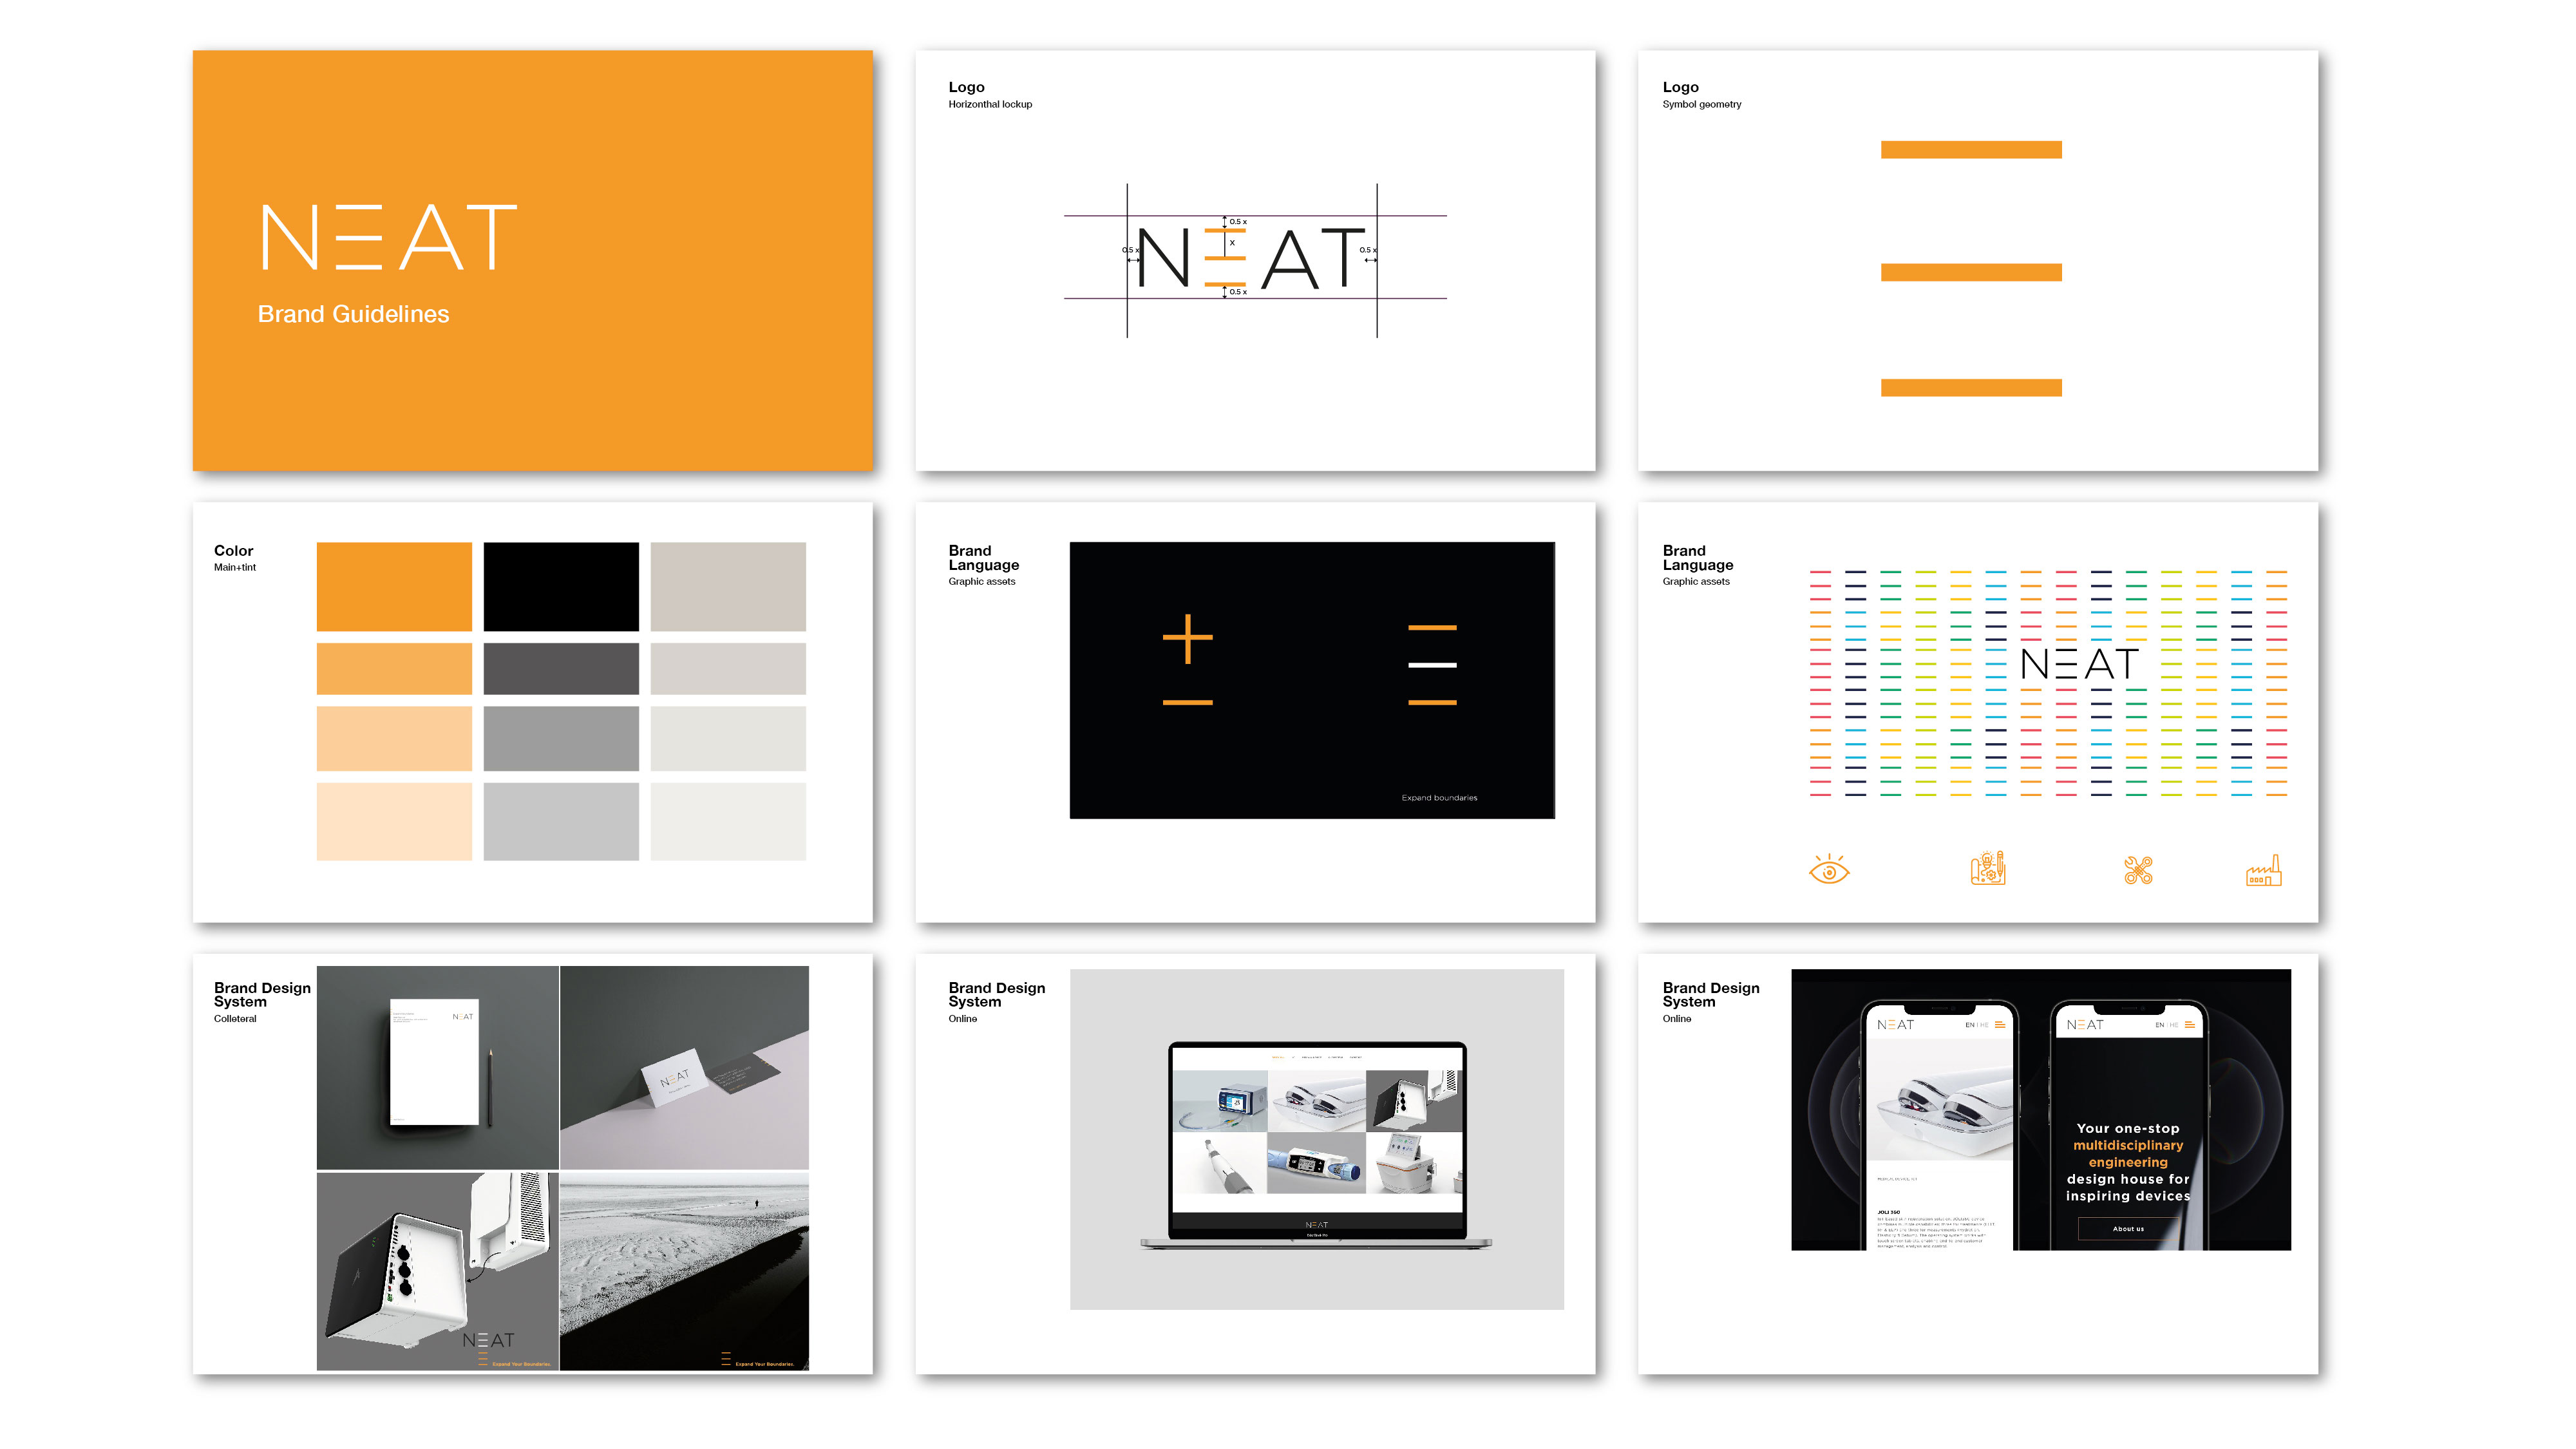 NotFromHere-Neat-Brand-Guidelines